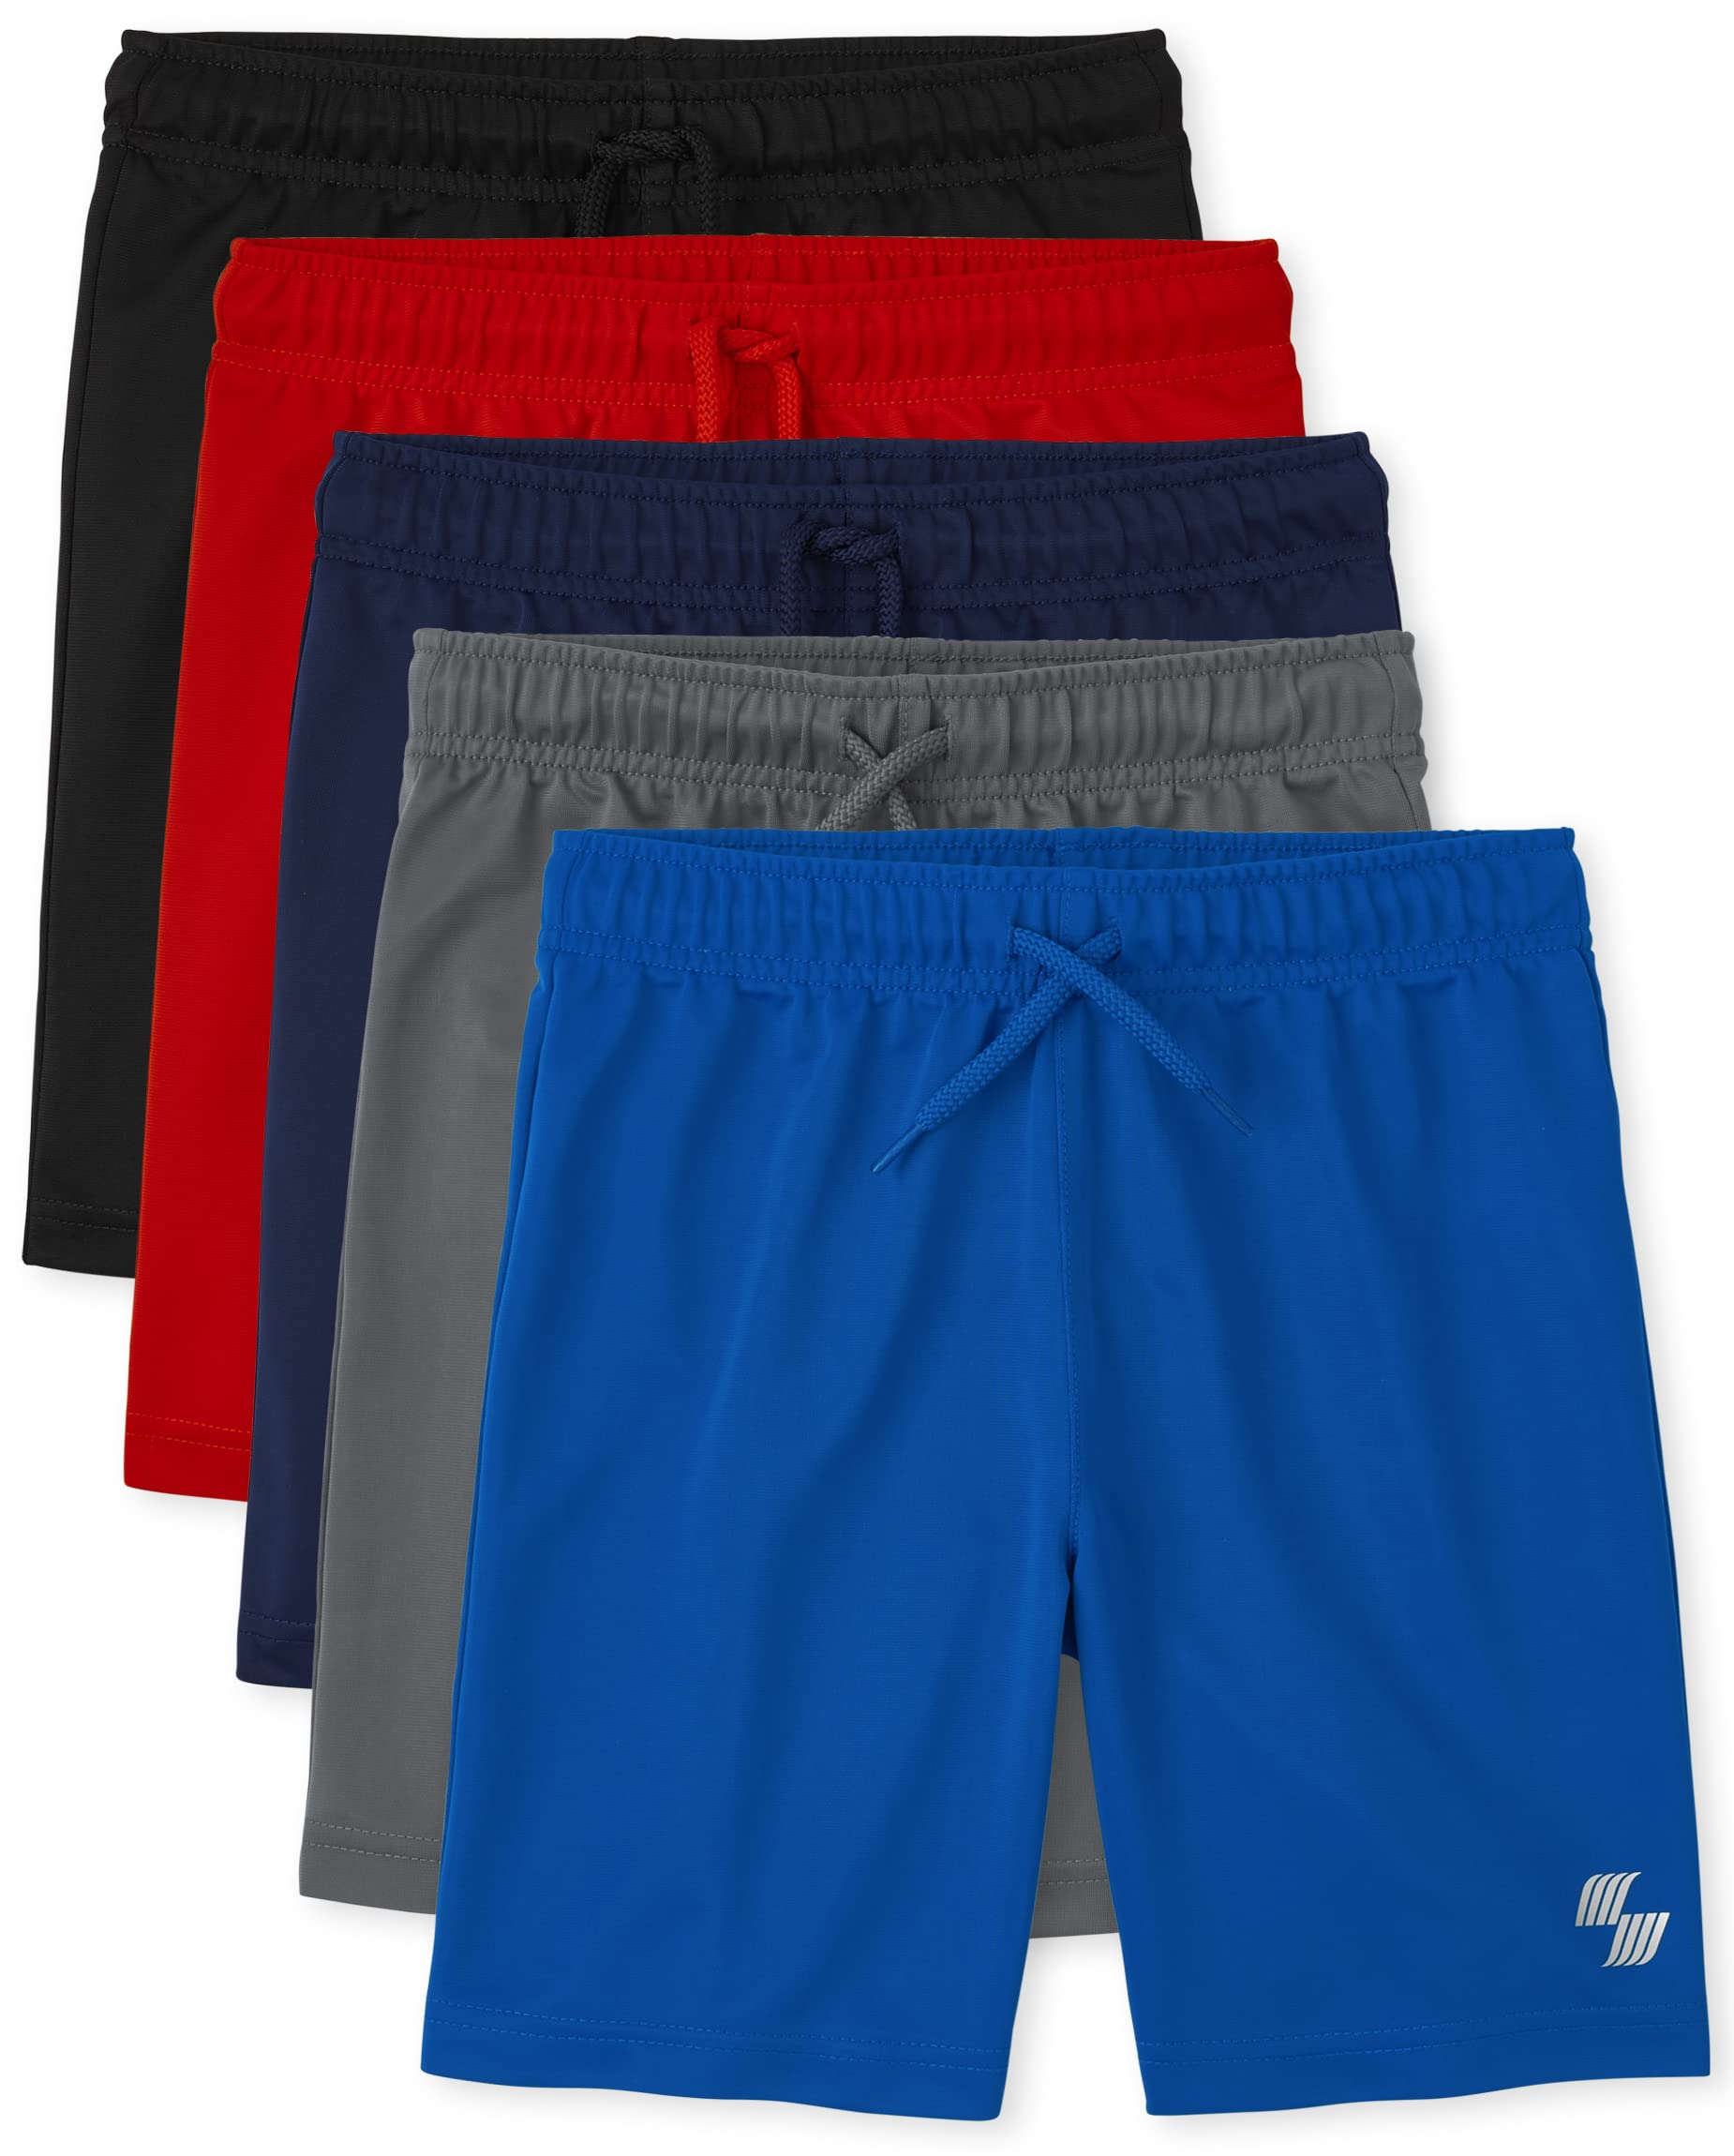 The Children's Place Boys' Athletic Basketball Shorts